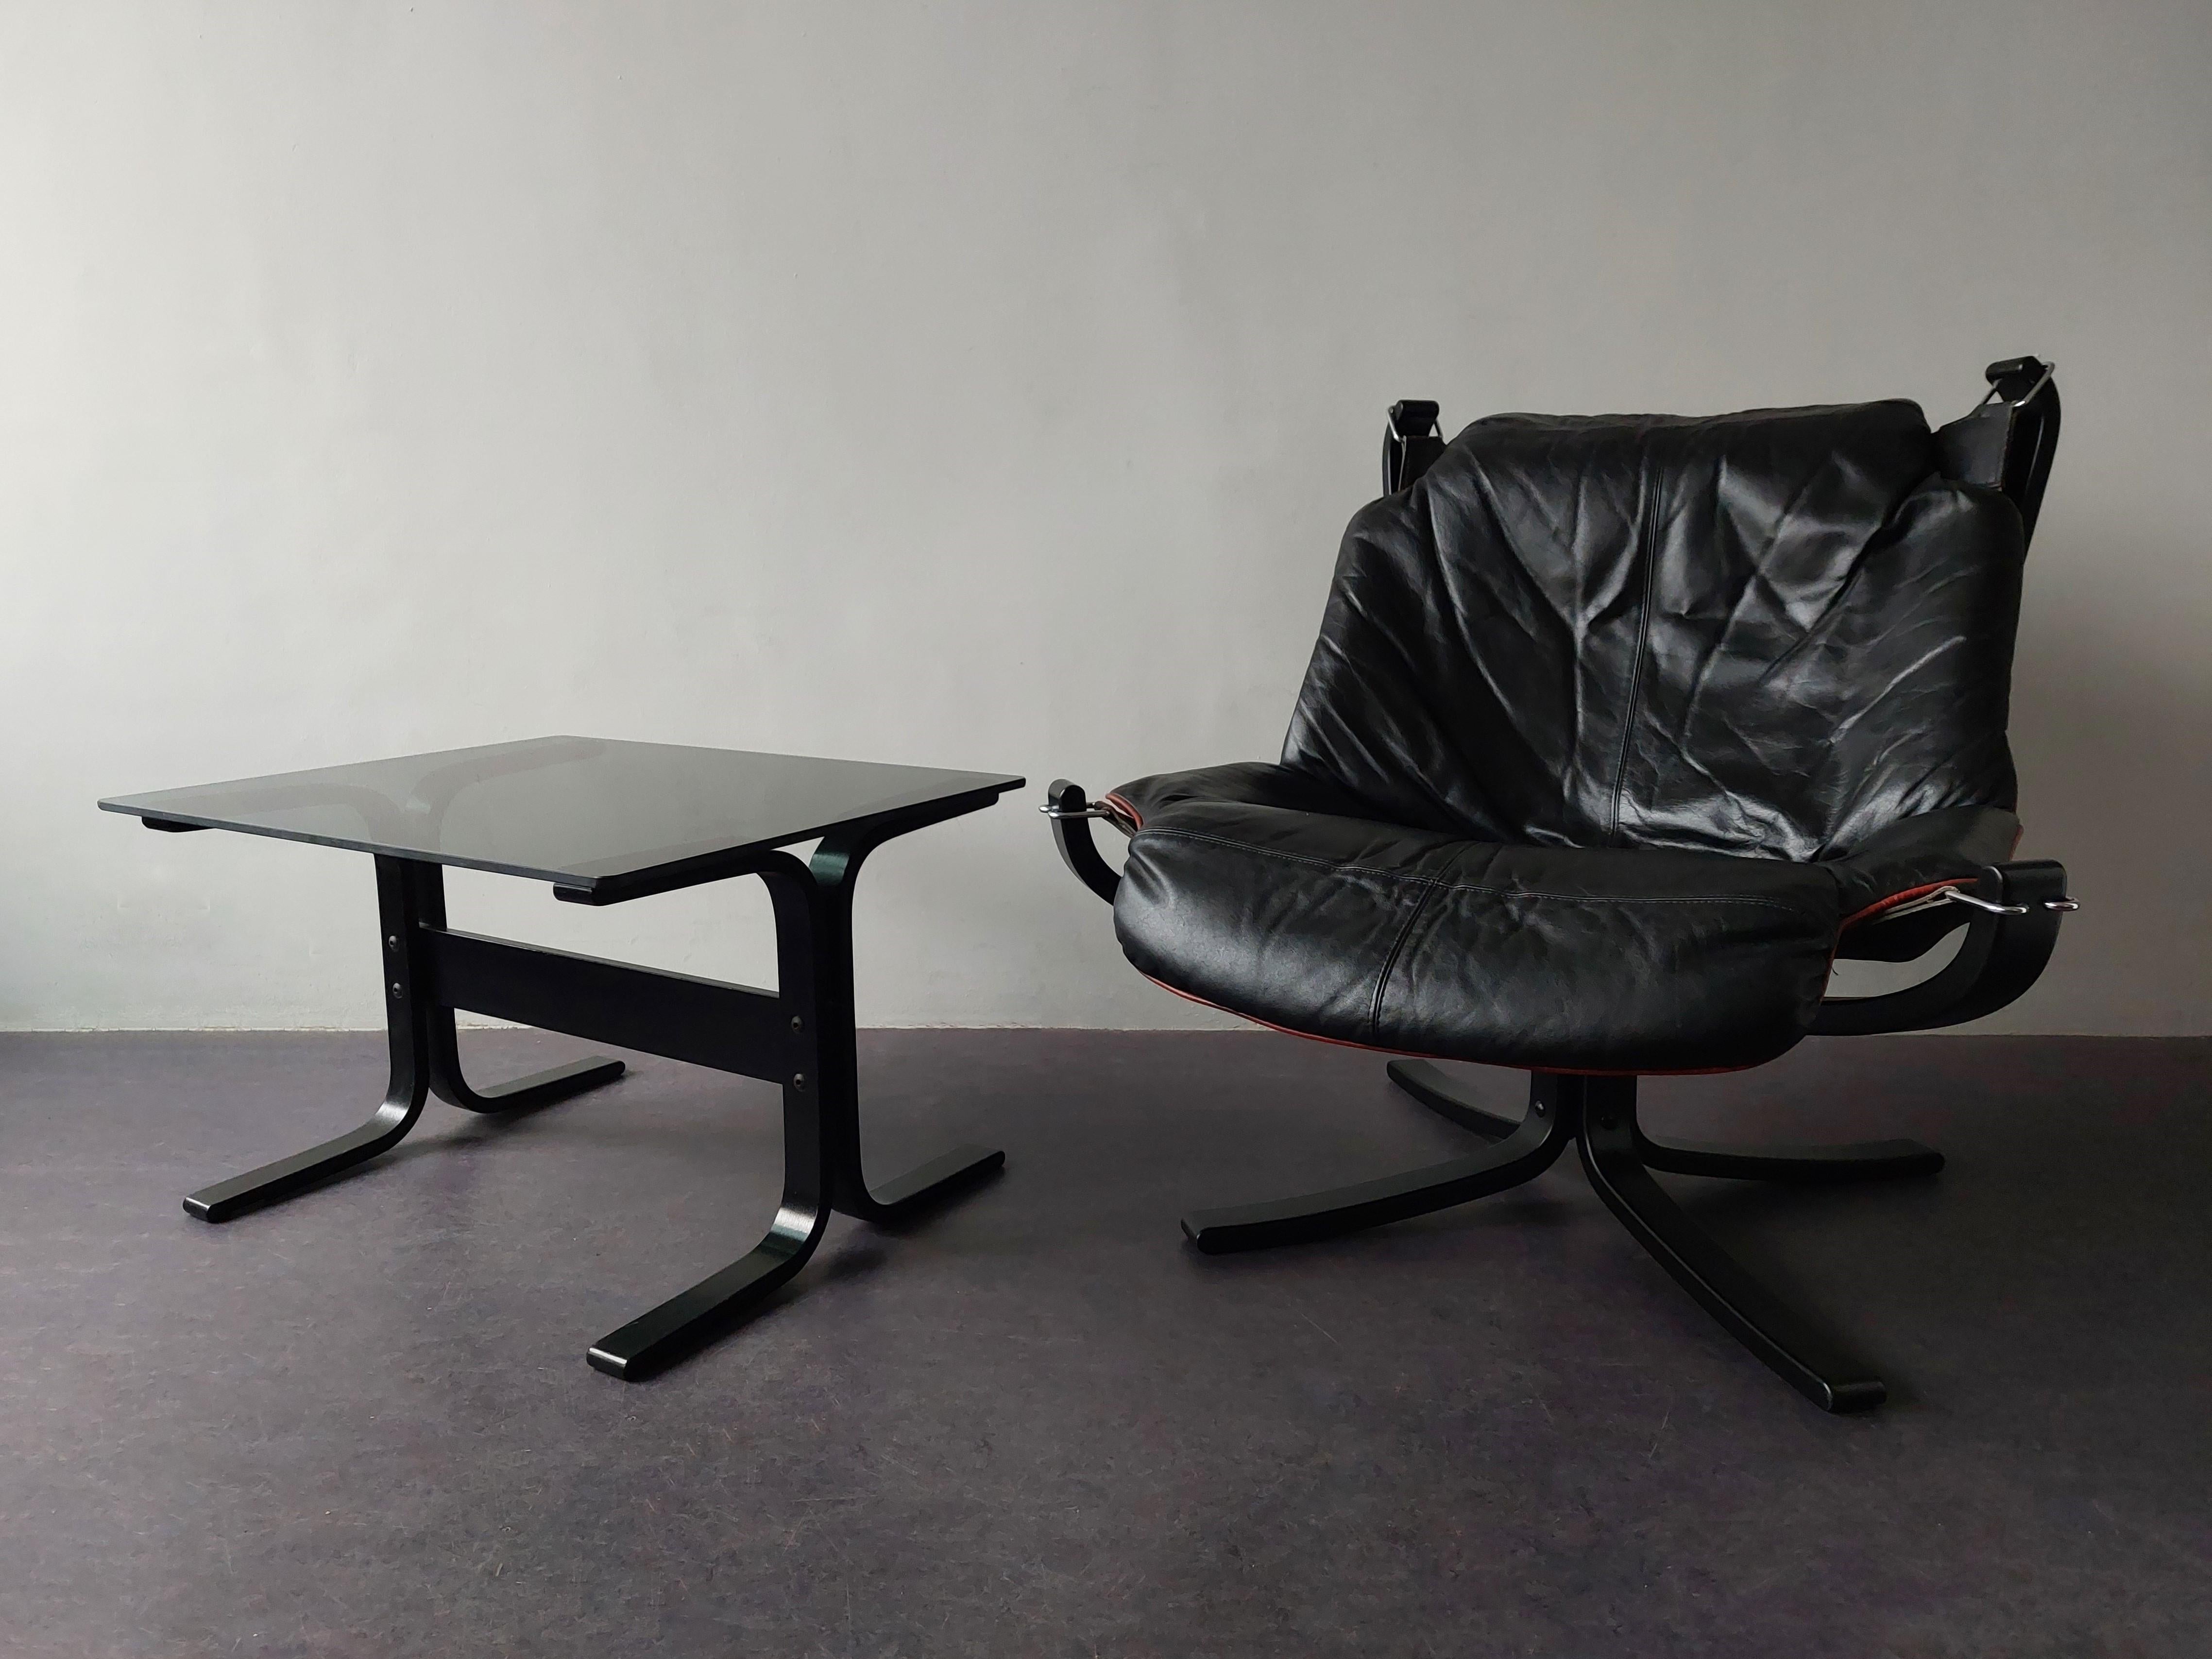 The Falcon chair was designed by Sigurd Ressell for Vatne Møbler in 1970 in Norway. A beautiful low back relaxing lounge chair. It has a black base made of bended plywood and a supple black leather with red trim seat. The seat is mounted on leather